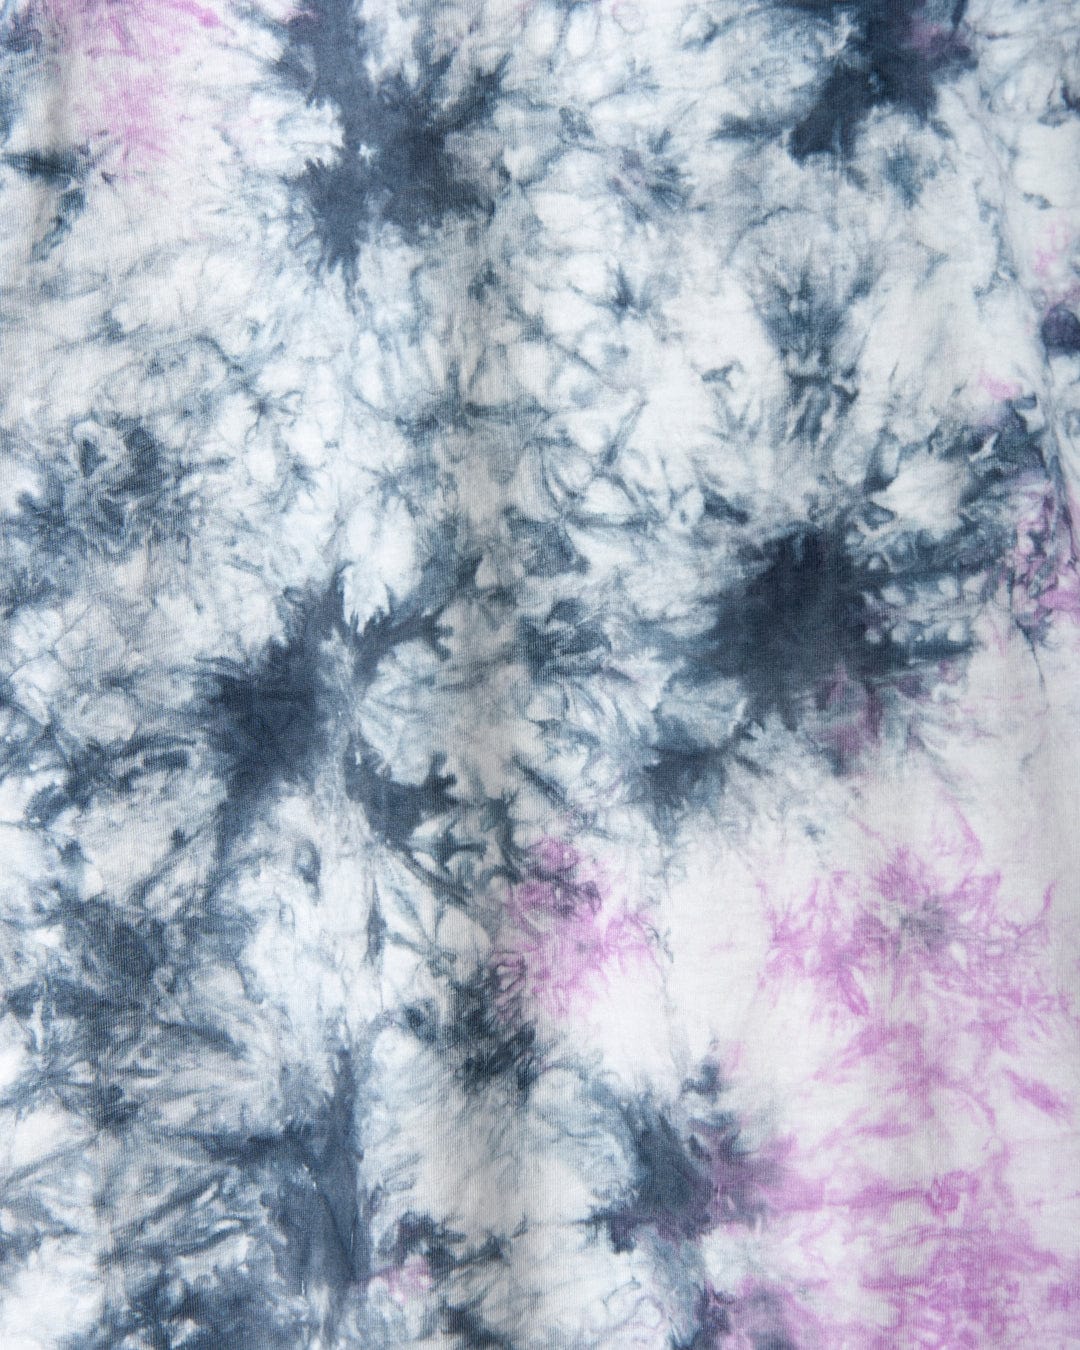 Abstract 100% Cotton fabric with tie-dye effect in shades of gray and hints of purple, featuring Wave Rider Cornwall branding.